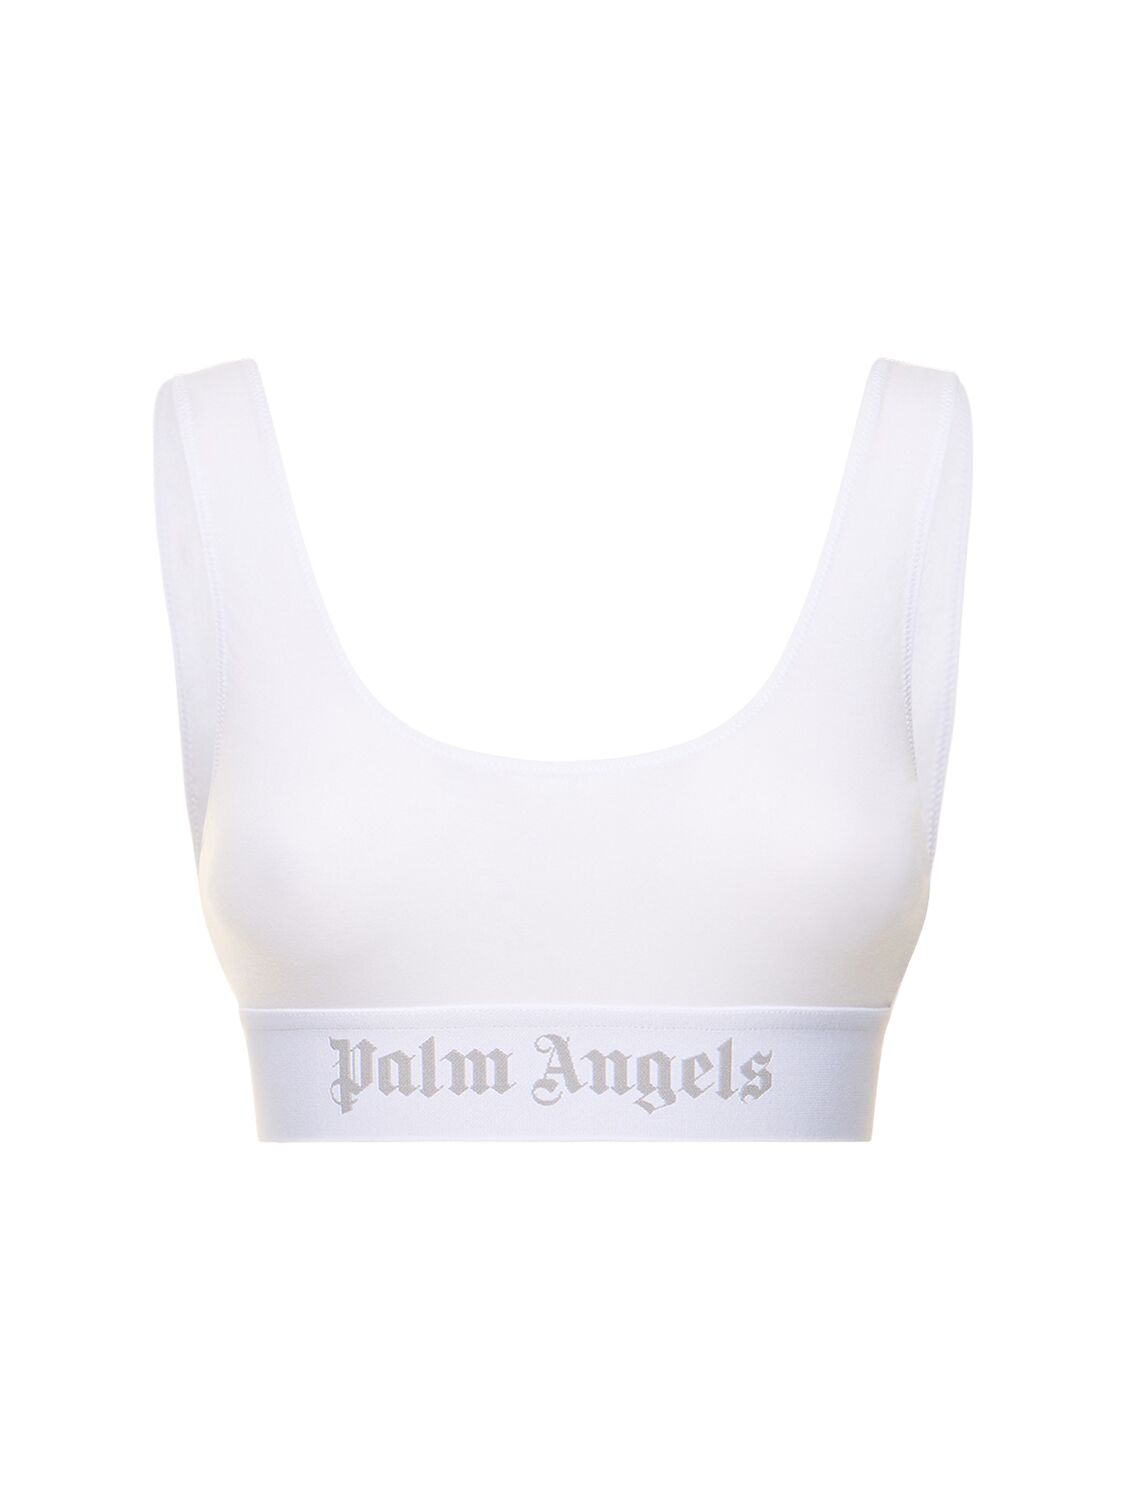 Classic Logo Triangle Bra in white - Palm Angels® Official